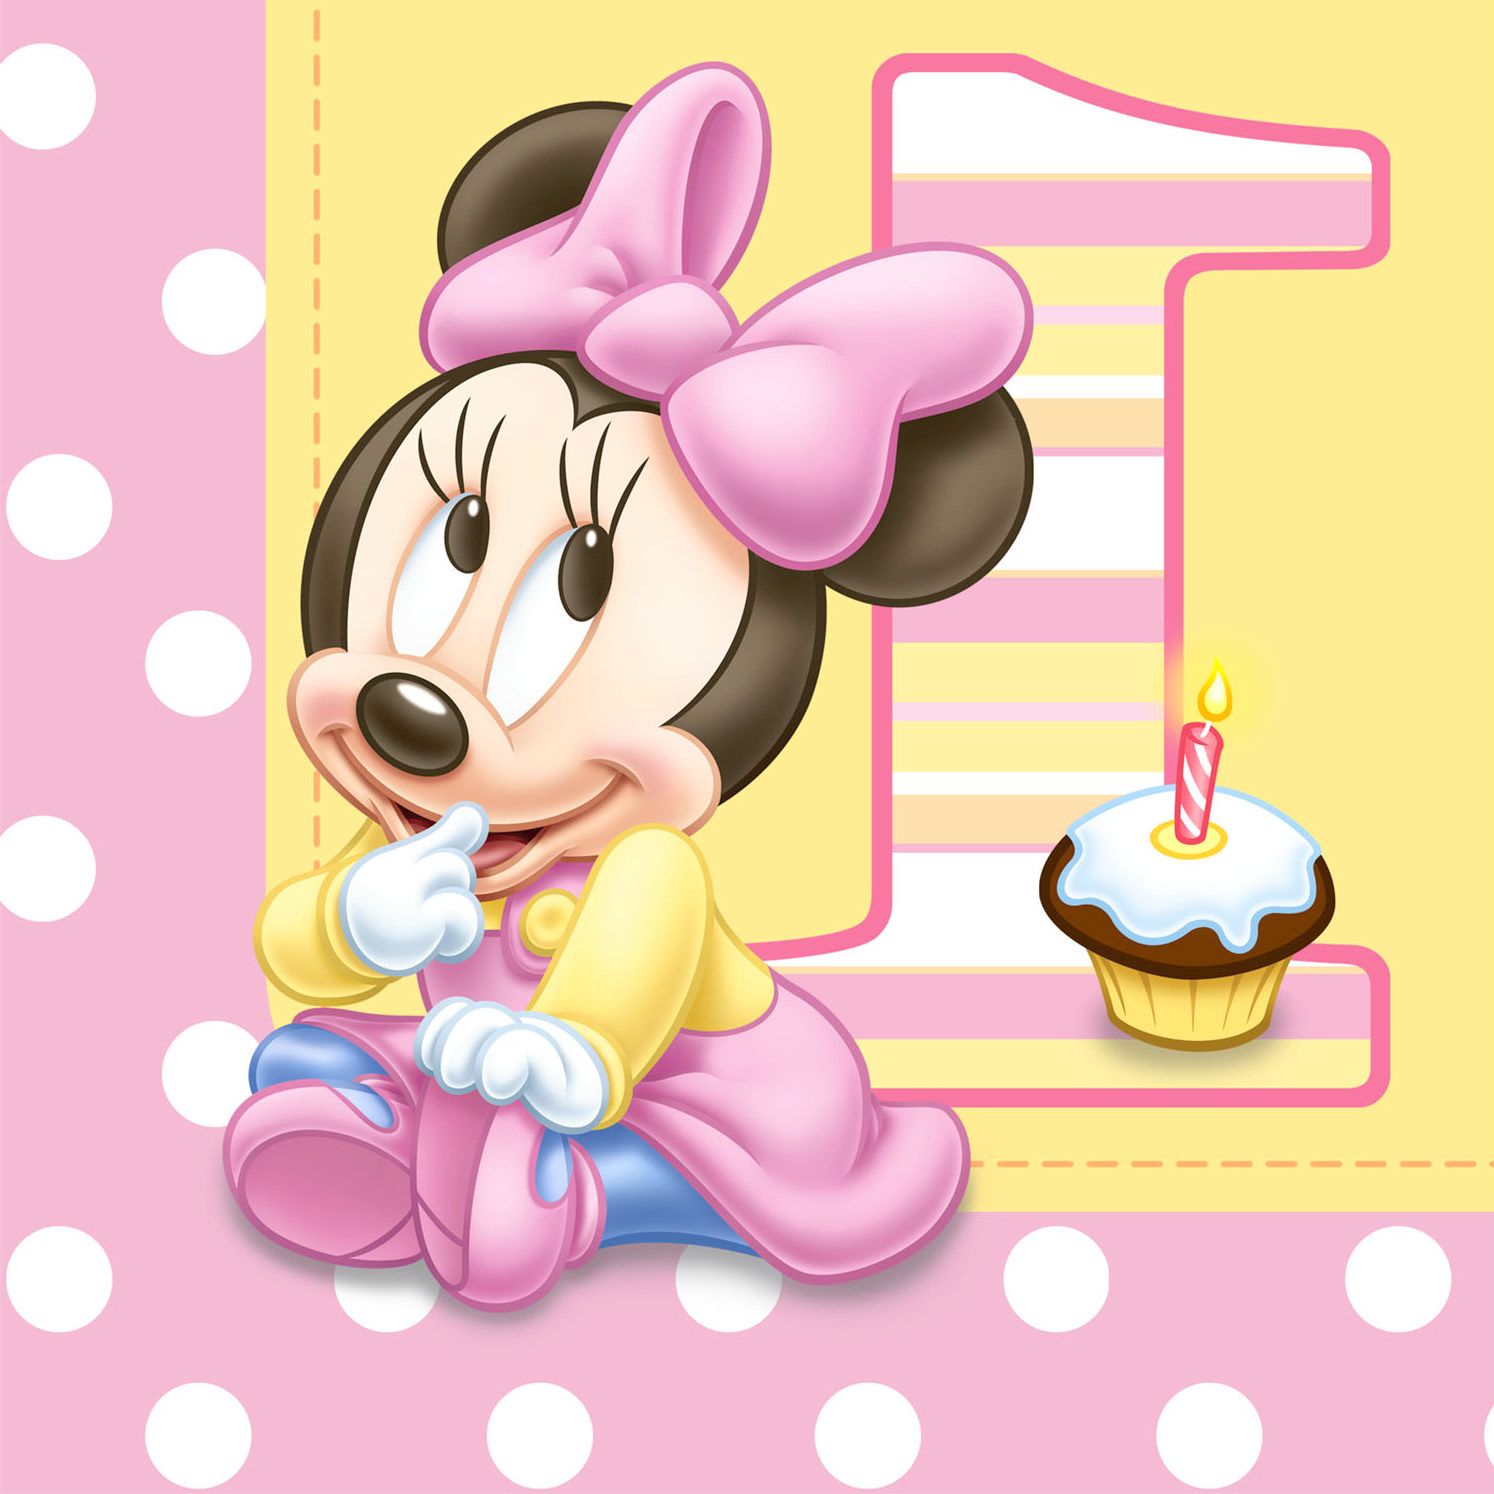 Baby Minnie Mouse Wallpaper - Baby Minnie Mouse 1 - HD Wallpaper 